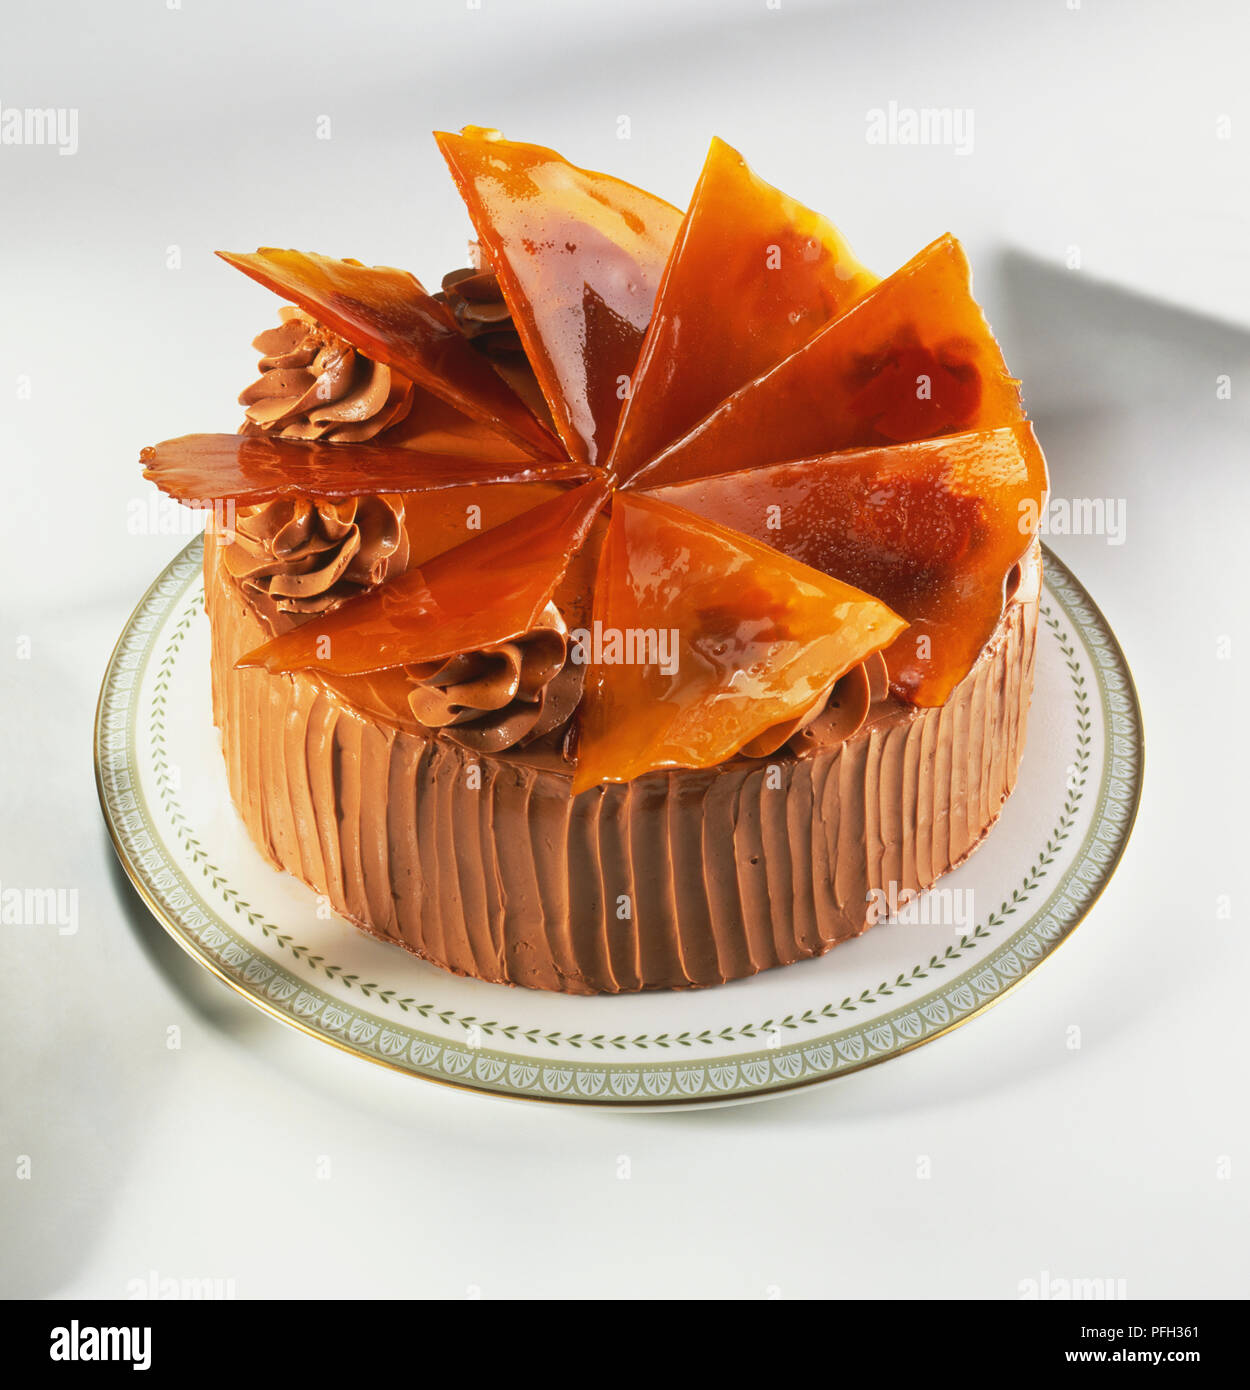 Dobos torta cake, a rich chocolate cream-coated cake topped with sheets of caramel glaze, high angle view Stock Photo